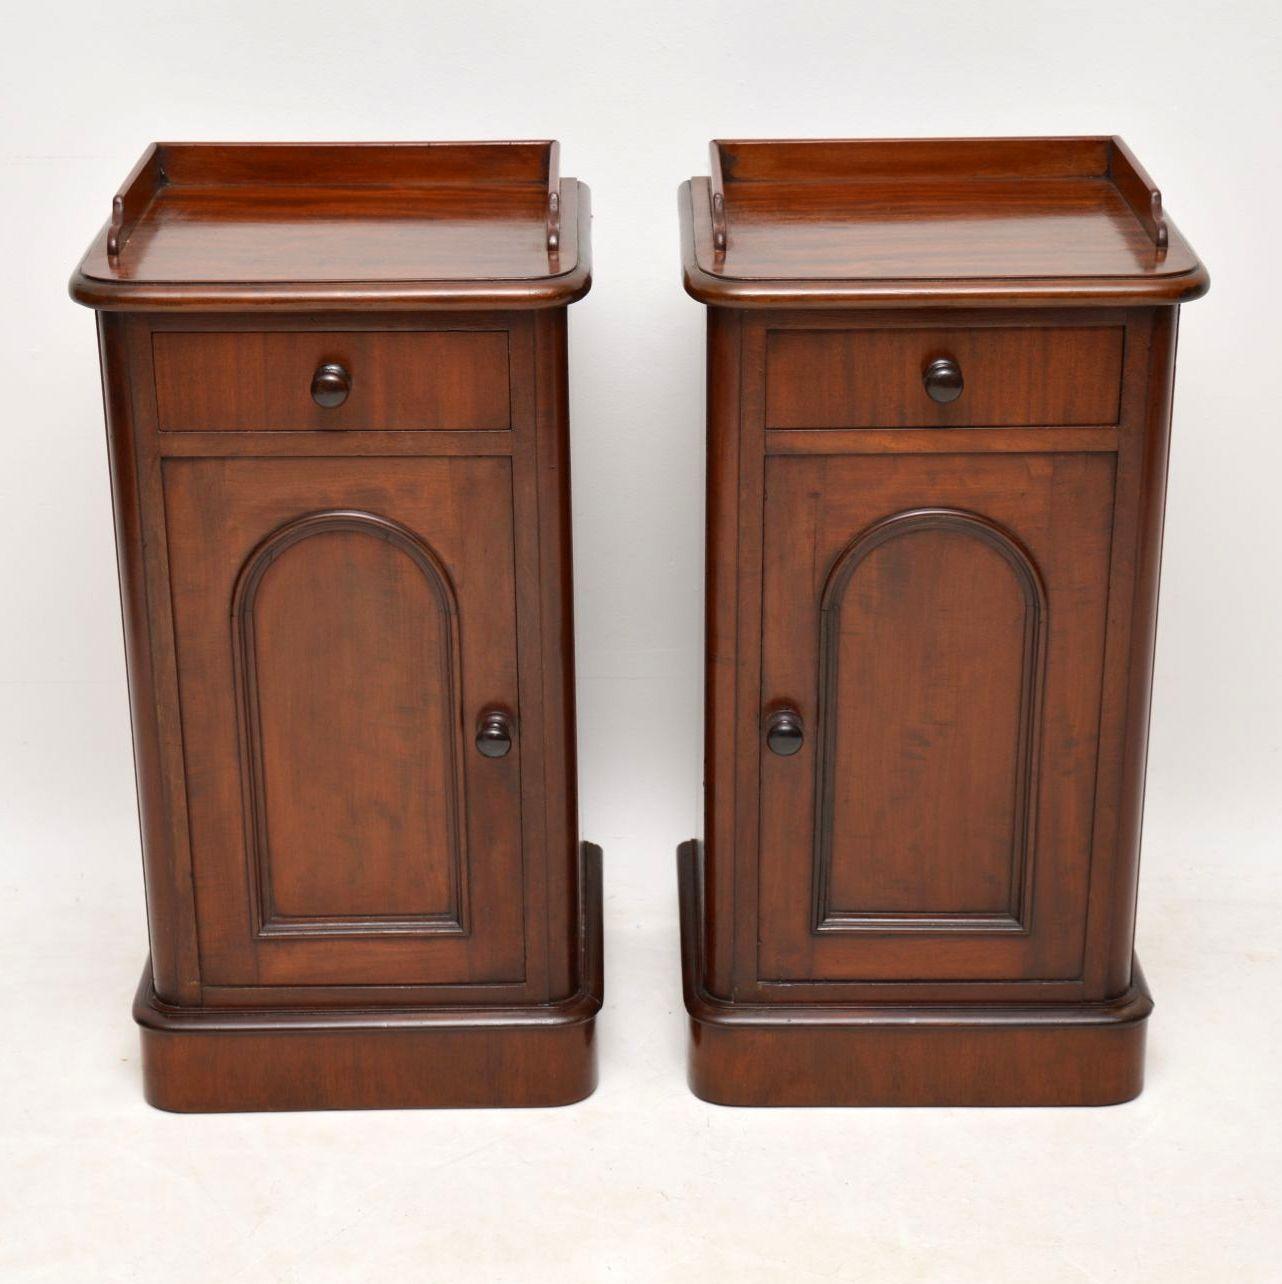 Pair of antique Victorian mahogany bedside cabinets in good condition and of lovely proportions, dating to circa 1860s period. They have top galleries, single drawers, single cupboards with arched paneled doors, mahogany turned handles and sit on